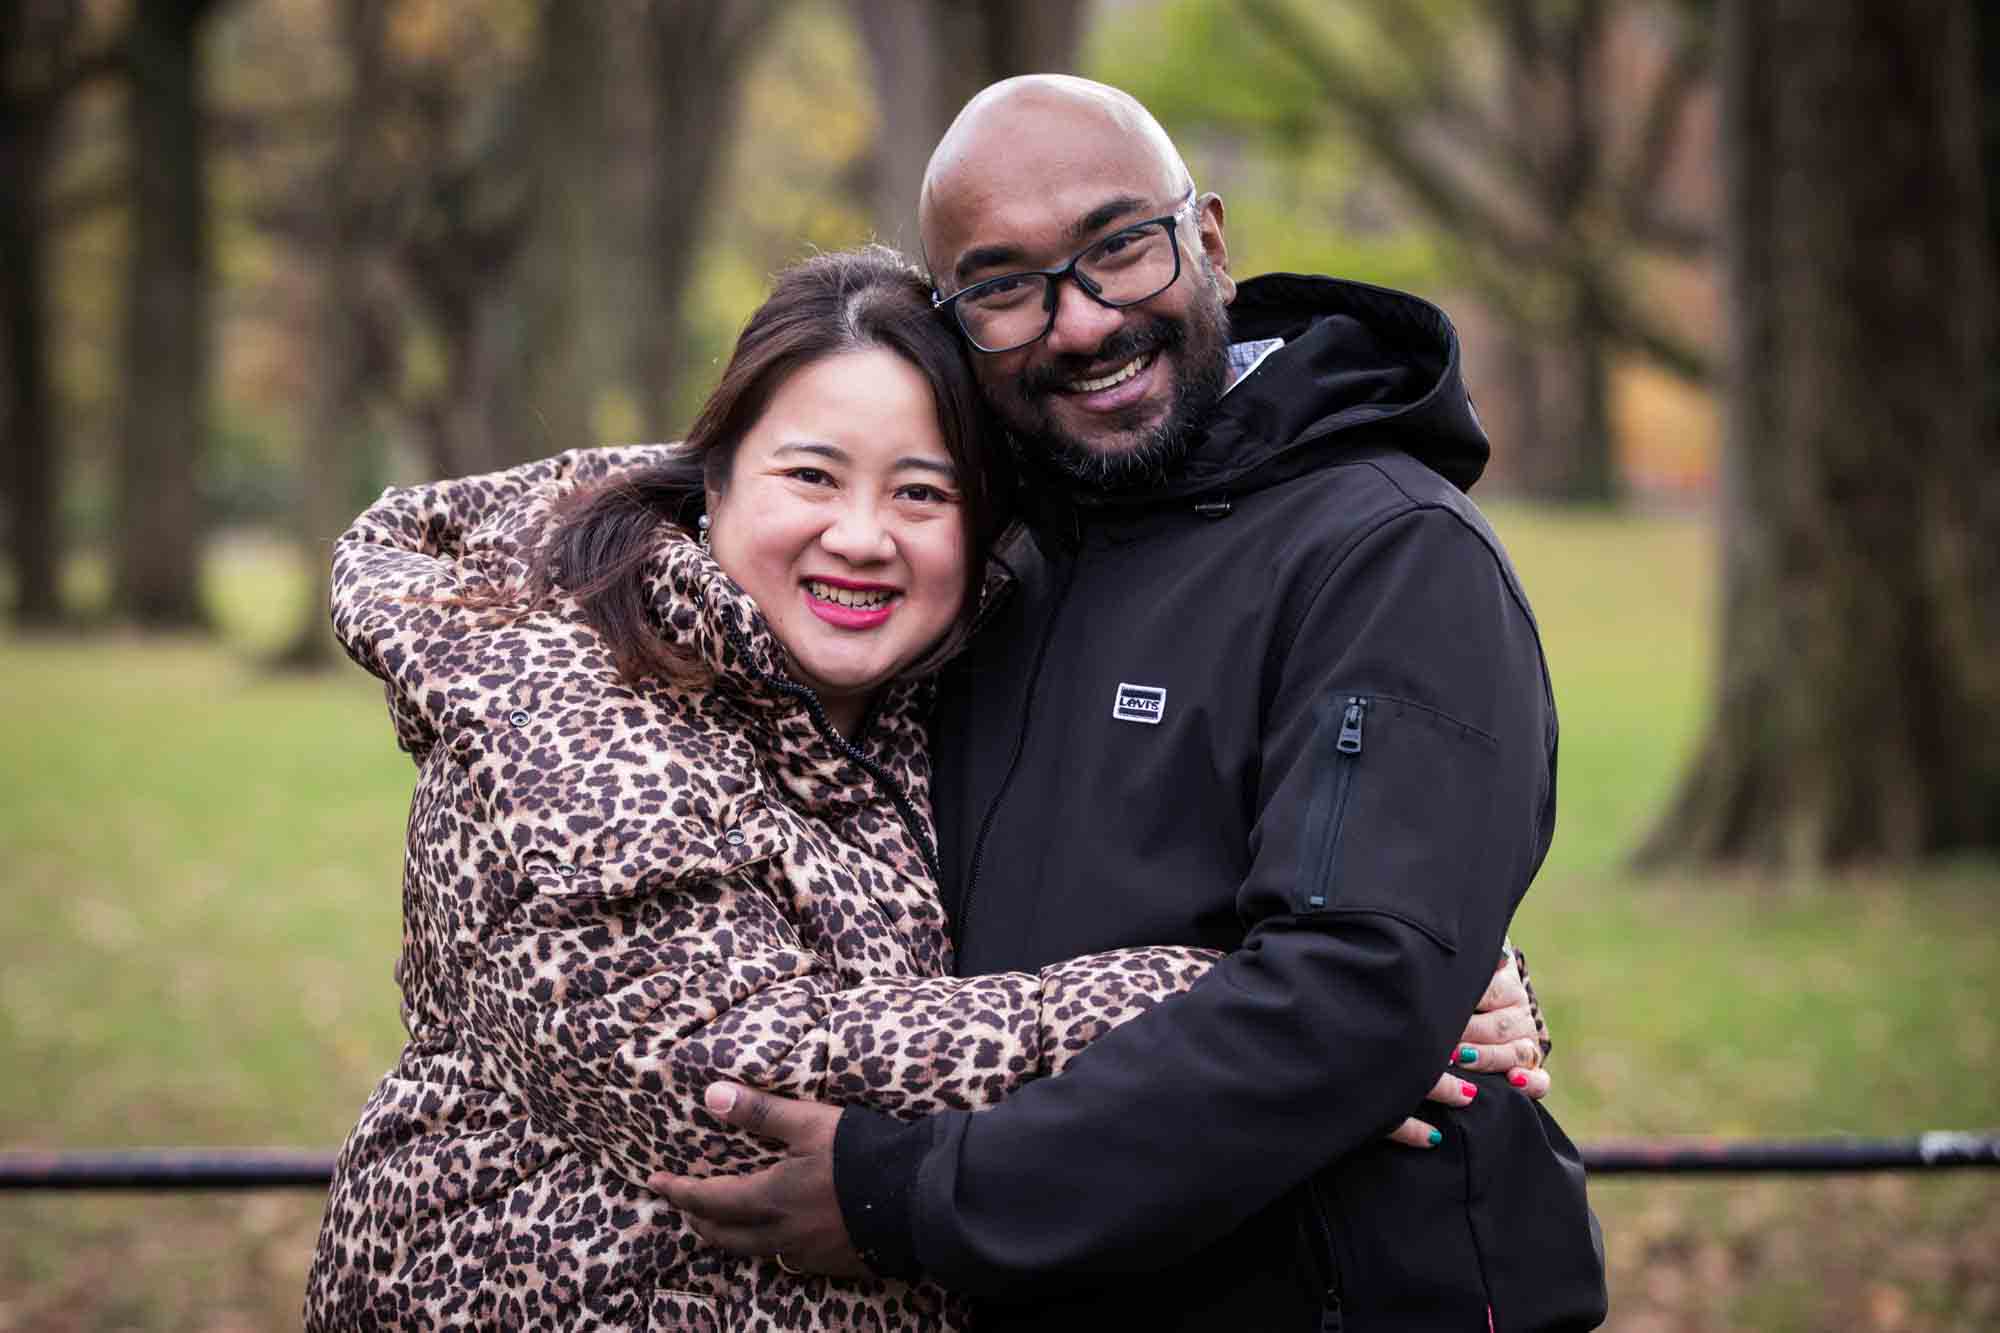 Central Park family portrait of couple hugging while wearing winter coats